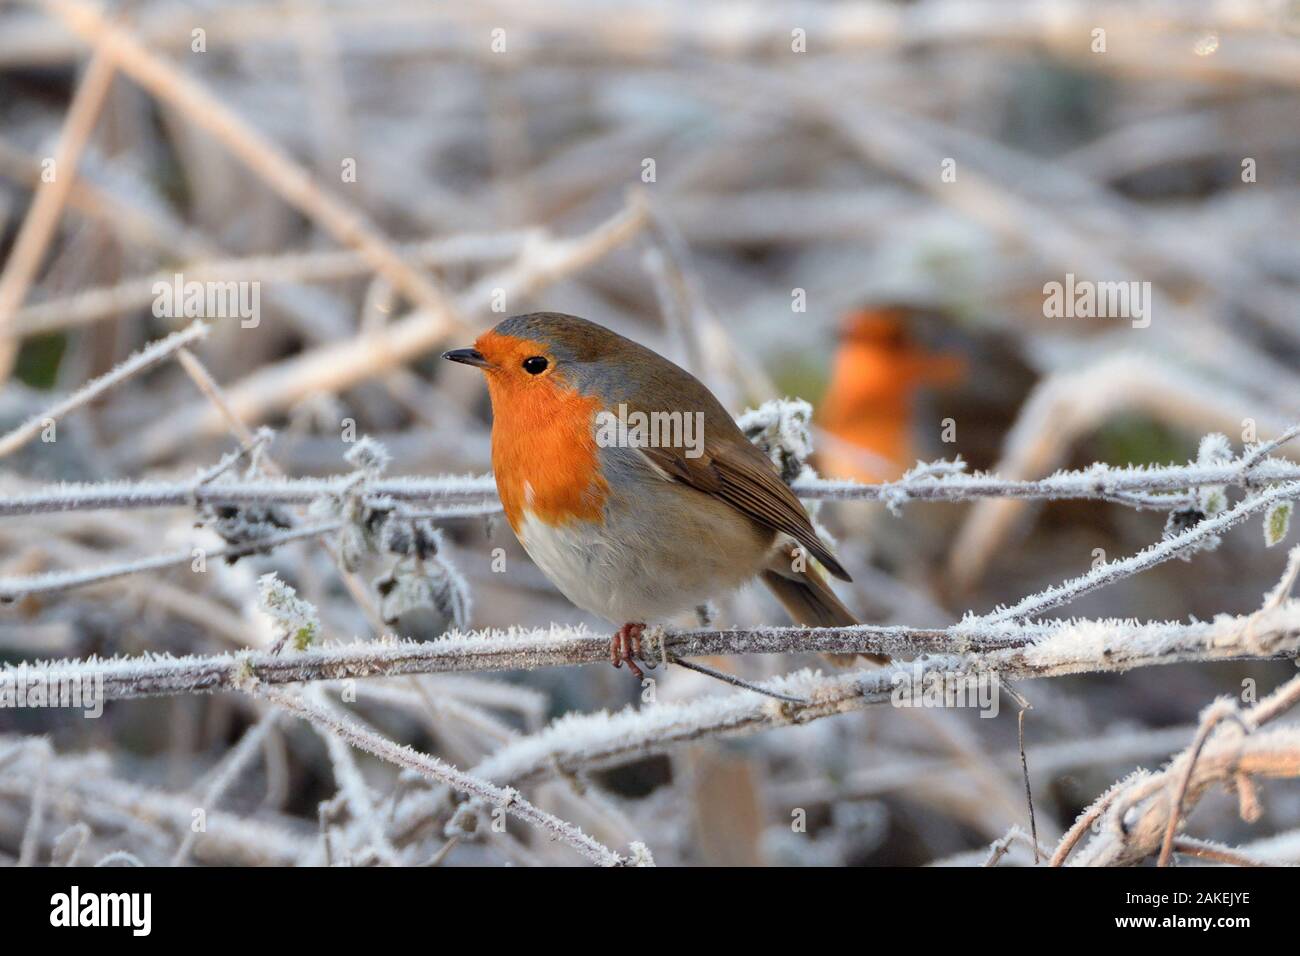 Two European robins (Erithacus rubecula) perched among hoar frosted vegetation on a cold winter morning, Gloucestershire, UK, December. Stock Photo